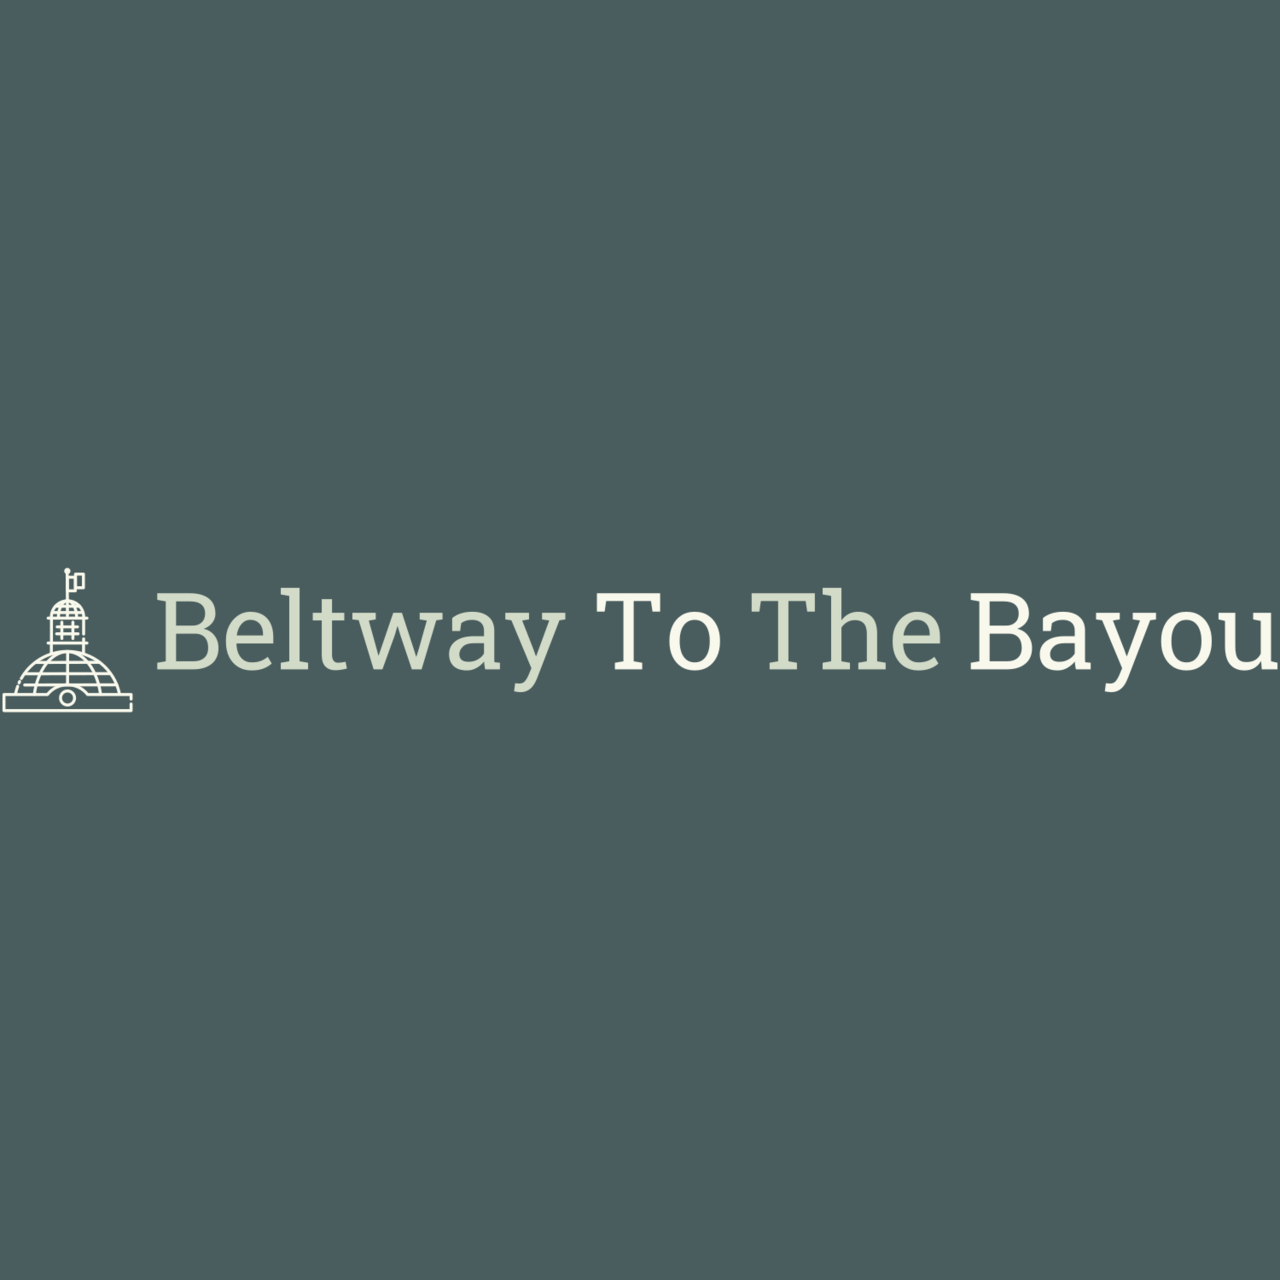 Beltway To The Bayou